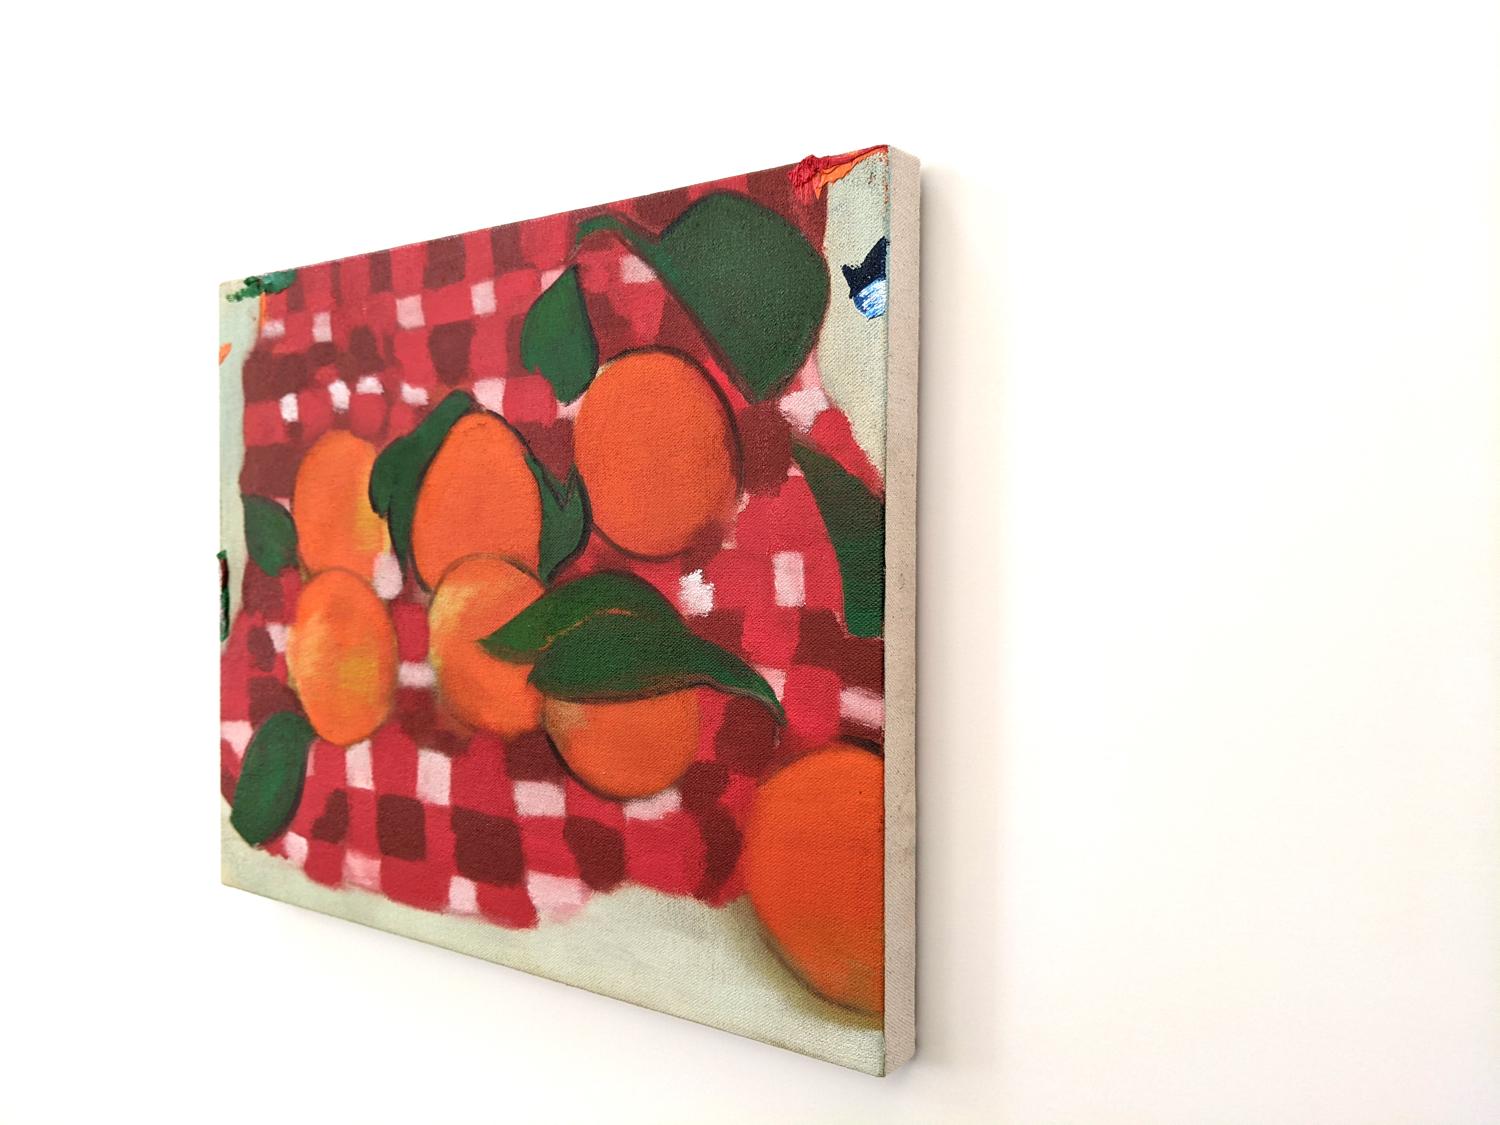 Montreal born artist Mel Davis created this beautifully curated composition of bold colours—a few oranges with green leaves scattered against a background of red and white gingham cloth. Davis was influenced by the colourful and fluid work of French